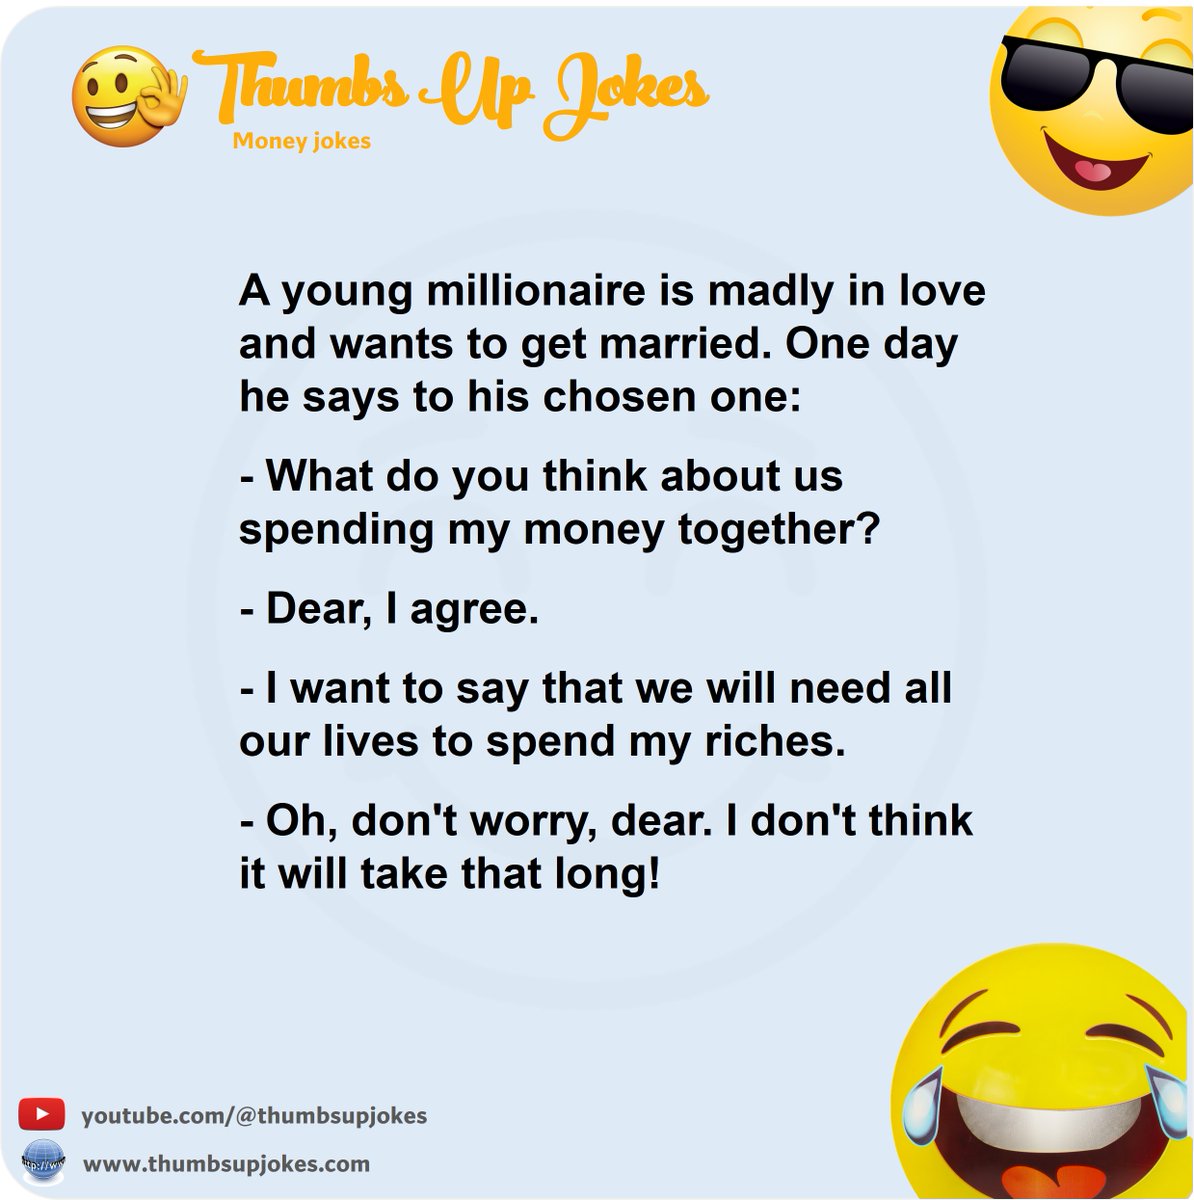 Another money joke. How long will it take you to spend the riches?
#joke #jokes #fun #funny #humor #comedy #moneyjokes #money